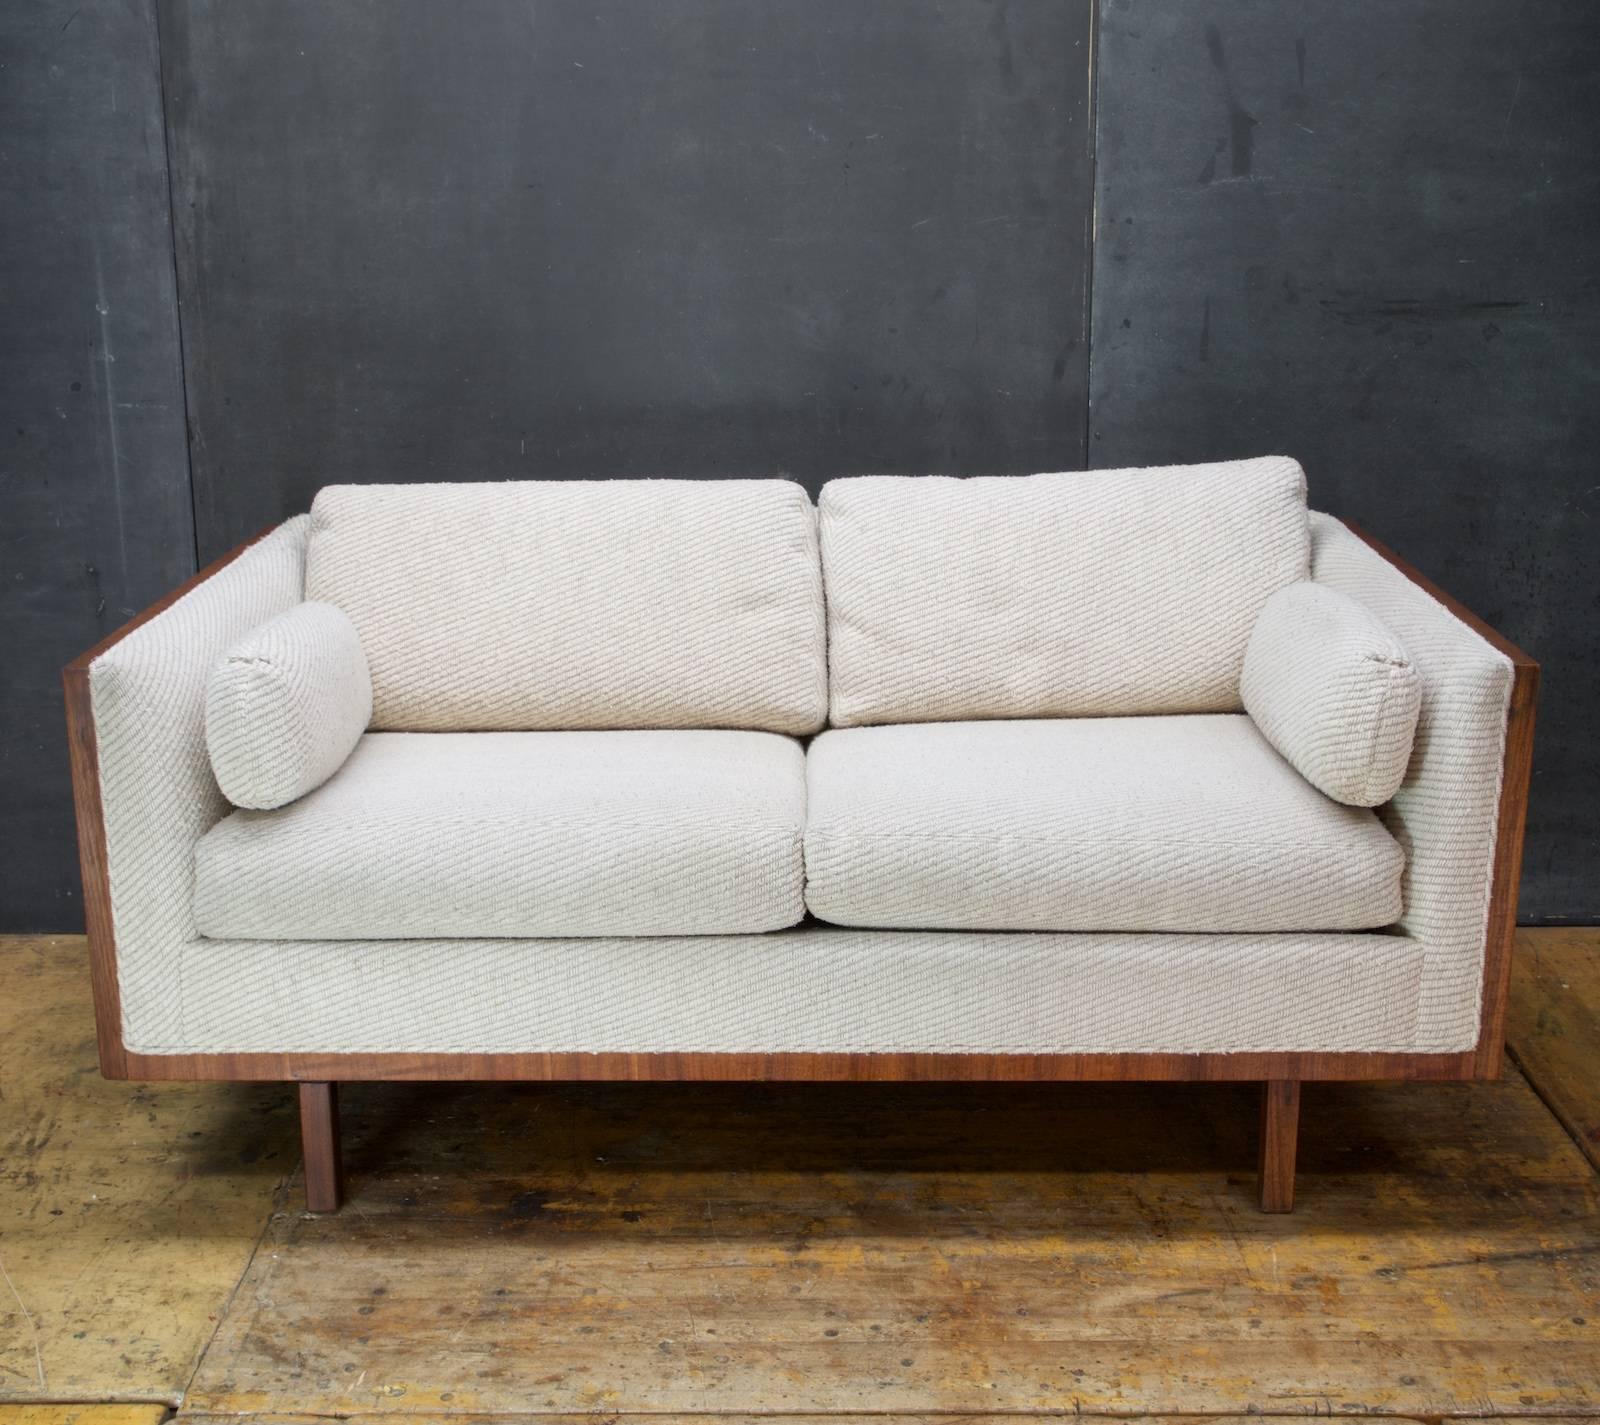 This design is often attributed to Milo Baughman but is not made by Thayer Coggin. Please note this sofa is in older upholstery, around 40 years. Still clean and comfortable but still could use updating.

Measures: W 64.5 x D 35.75 x Back H 26.5 x